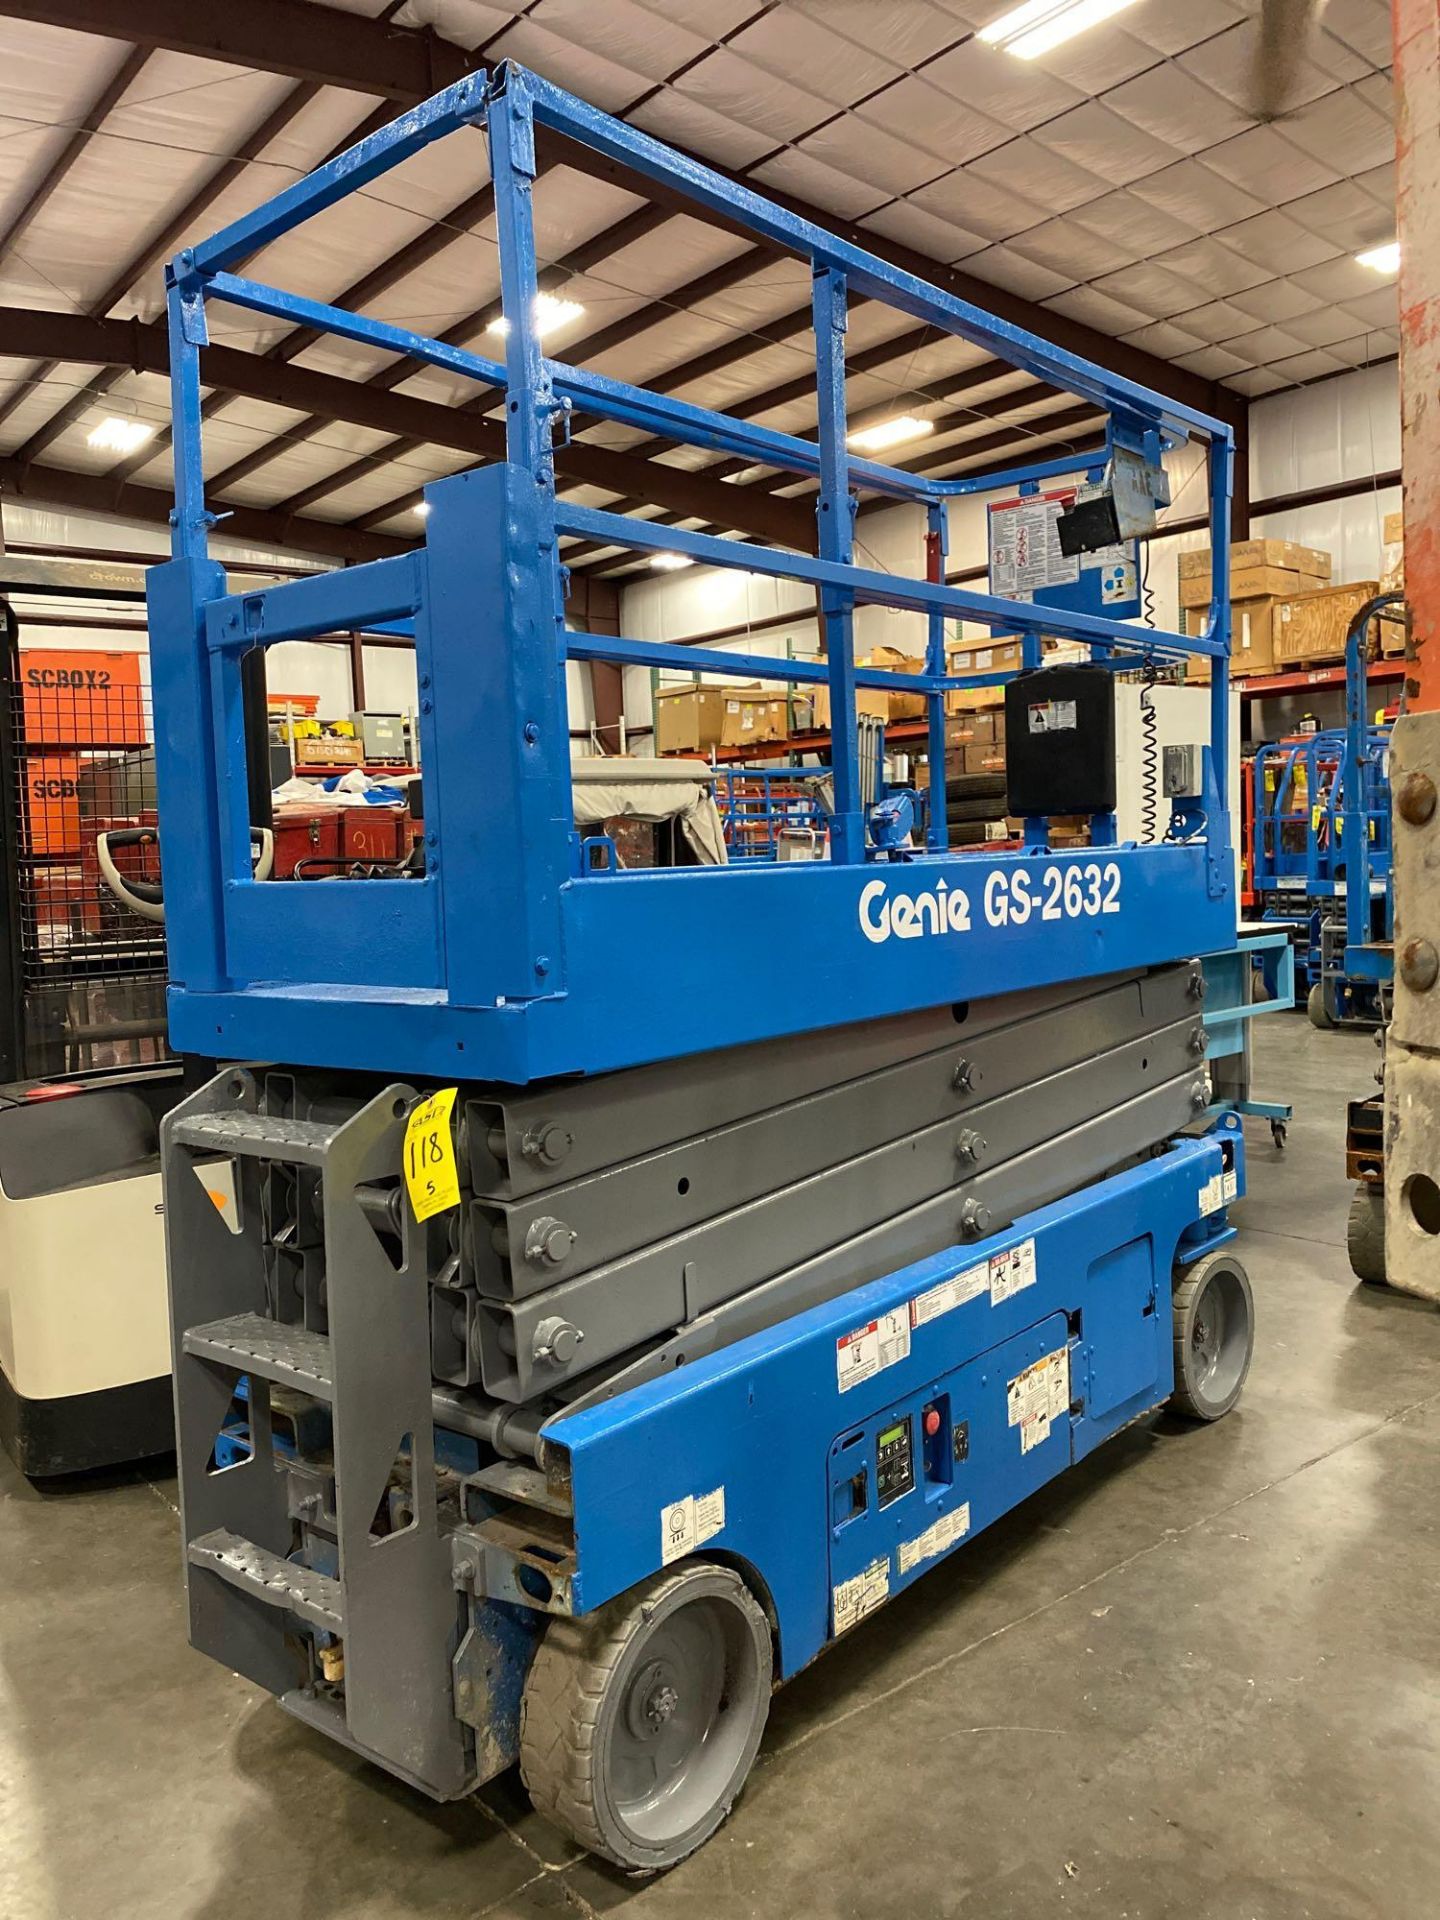 GENIE GS 2632 ELECTRIC SCISSOR LIFT, 26' PLATFORM HEIGHT, BUILT IN BATTERY CHARGER - Image 9 of 12